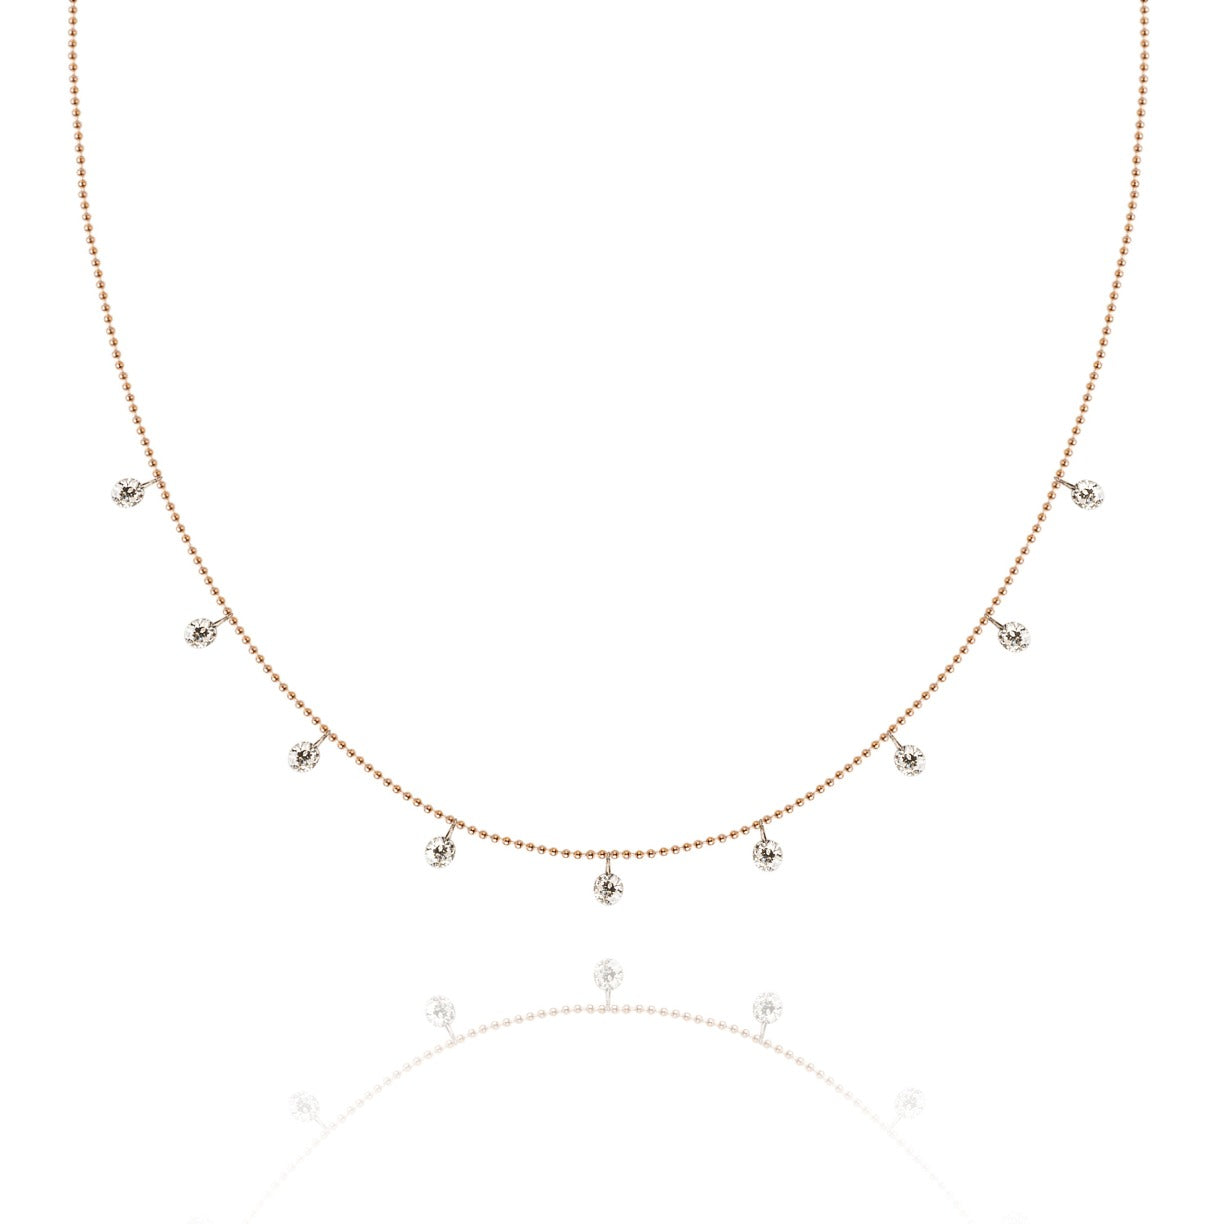 Rose gold snow necklace